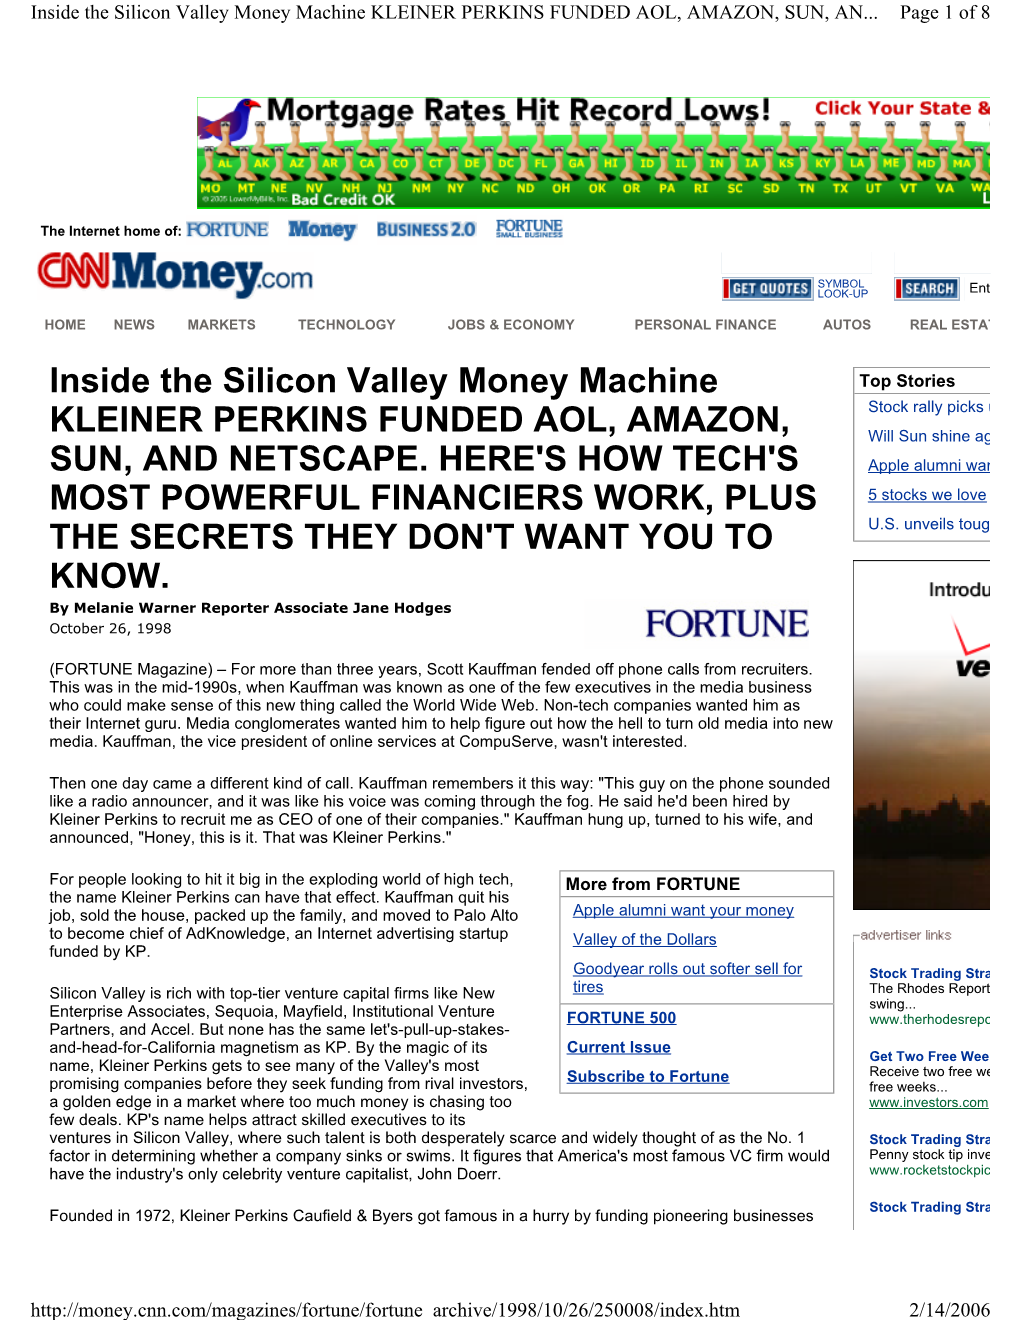 Inside the Silicon Valley Money Machine KLEINER PERKINS FUNDED AOL, AMAZON, SUN, AN